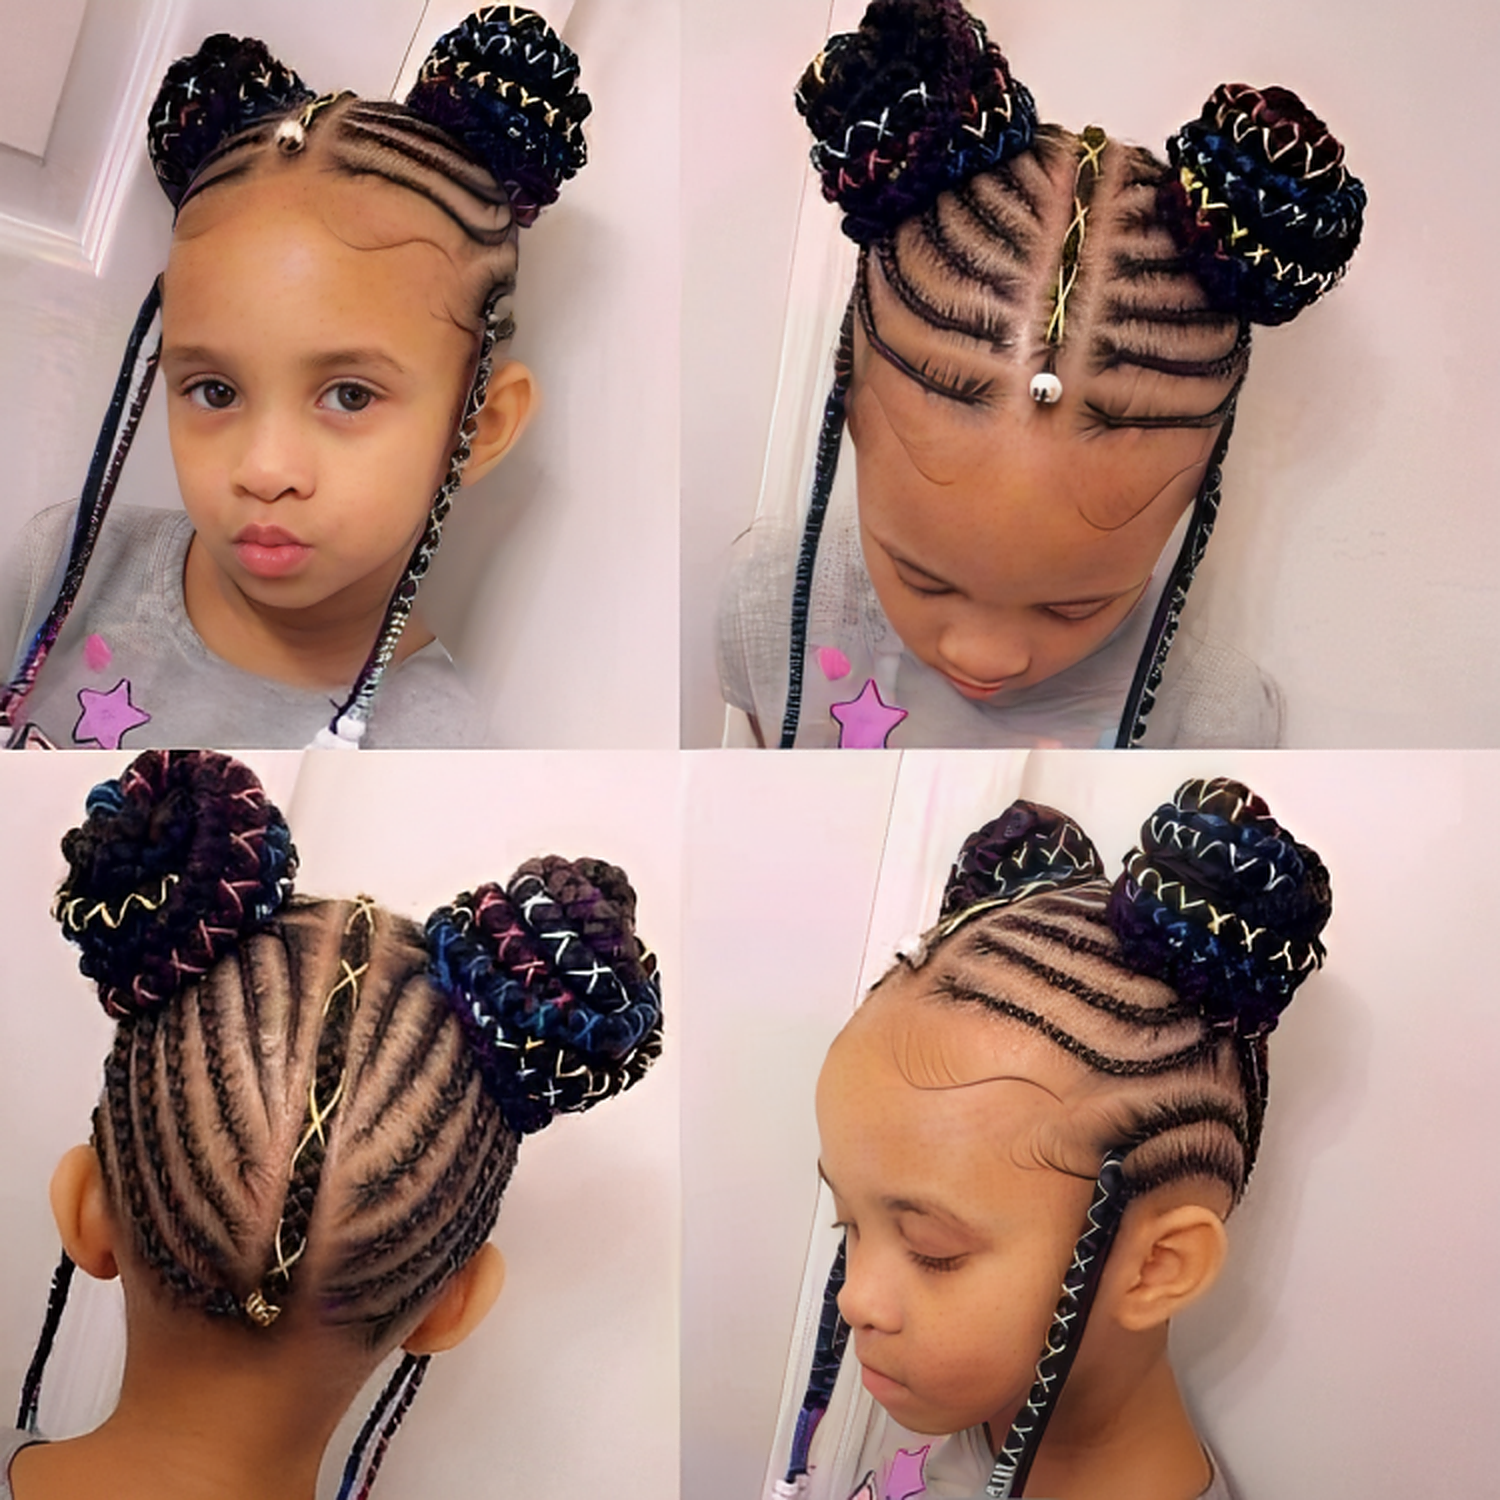 I Outdid Myself With This One | Medium Layered Braids - YouTube